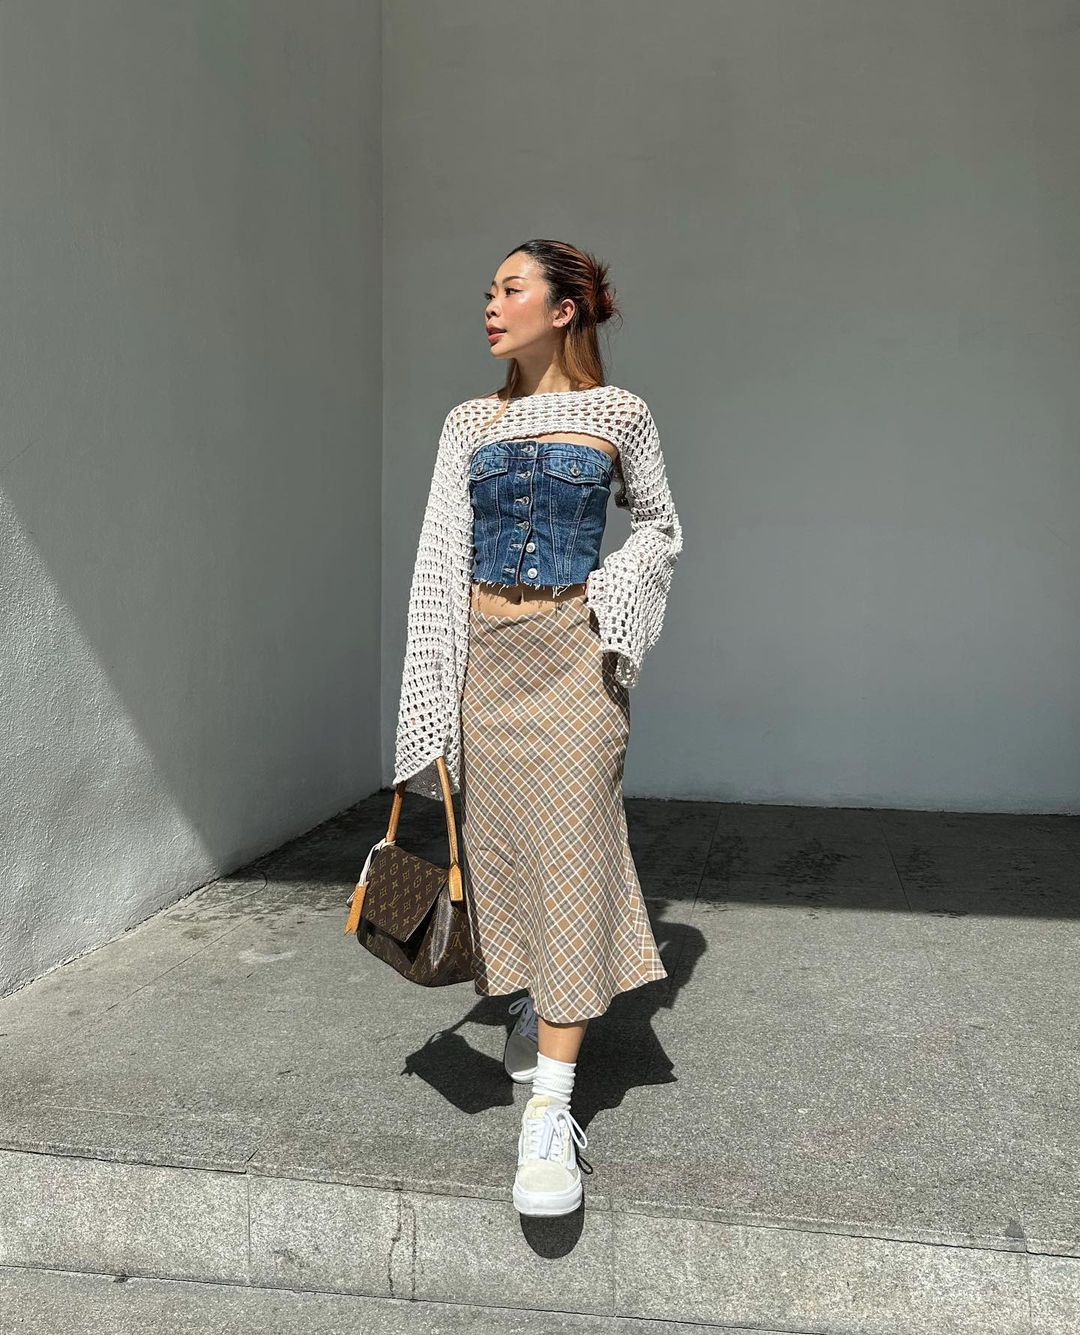 Rhea Bue-Ong White sneaker outfit ideas and inspo